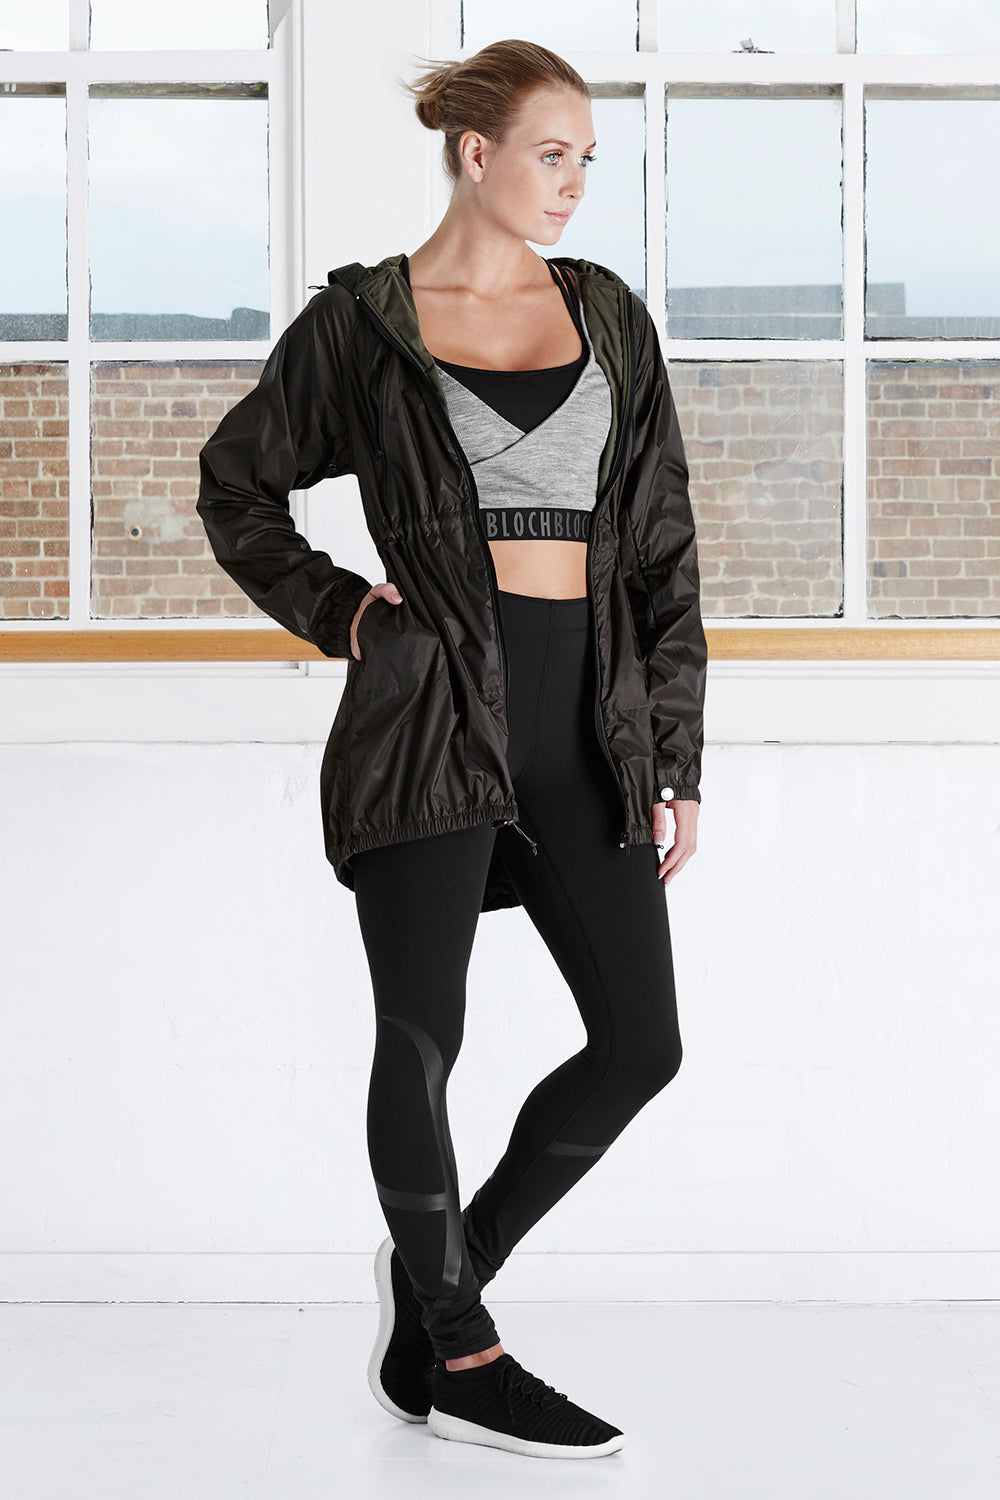 A female dancer in the studio wearing BLOCH workout wear and hooded jacket